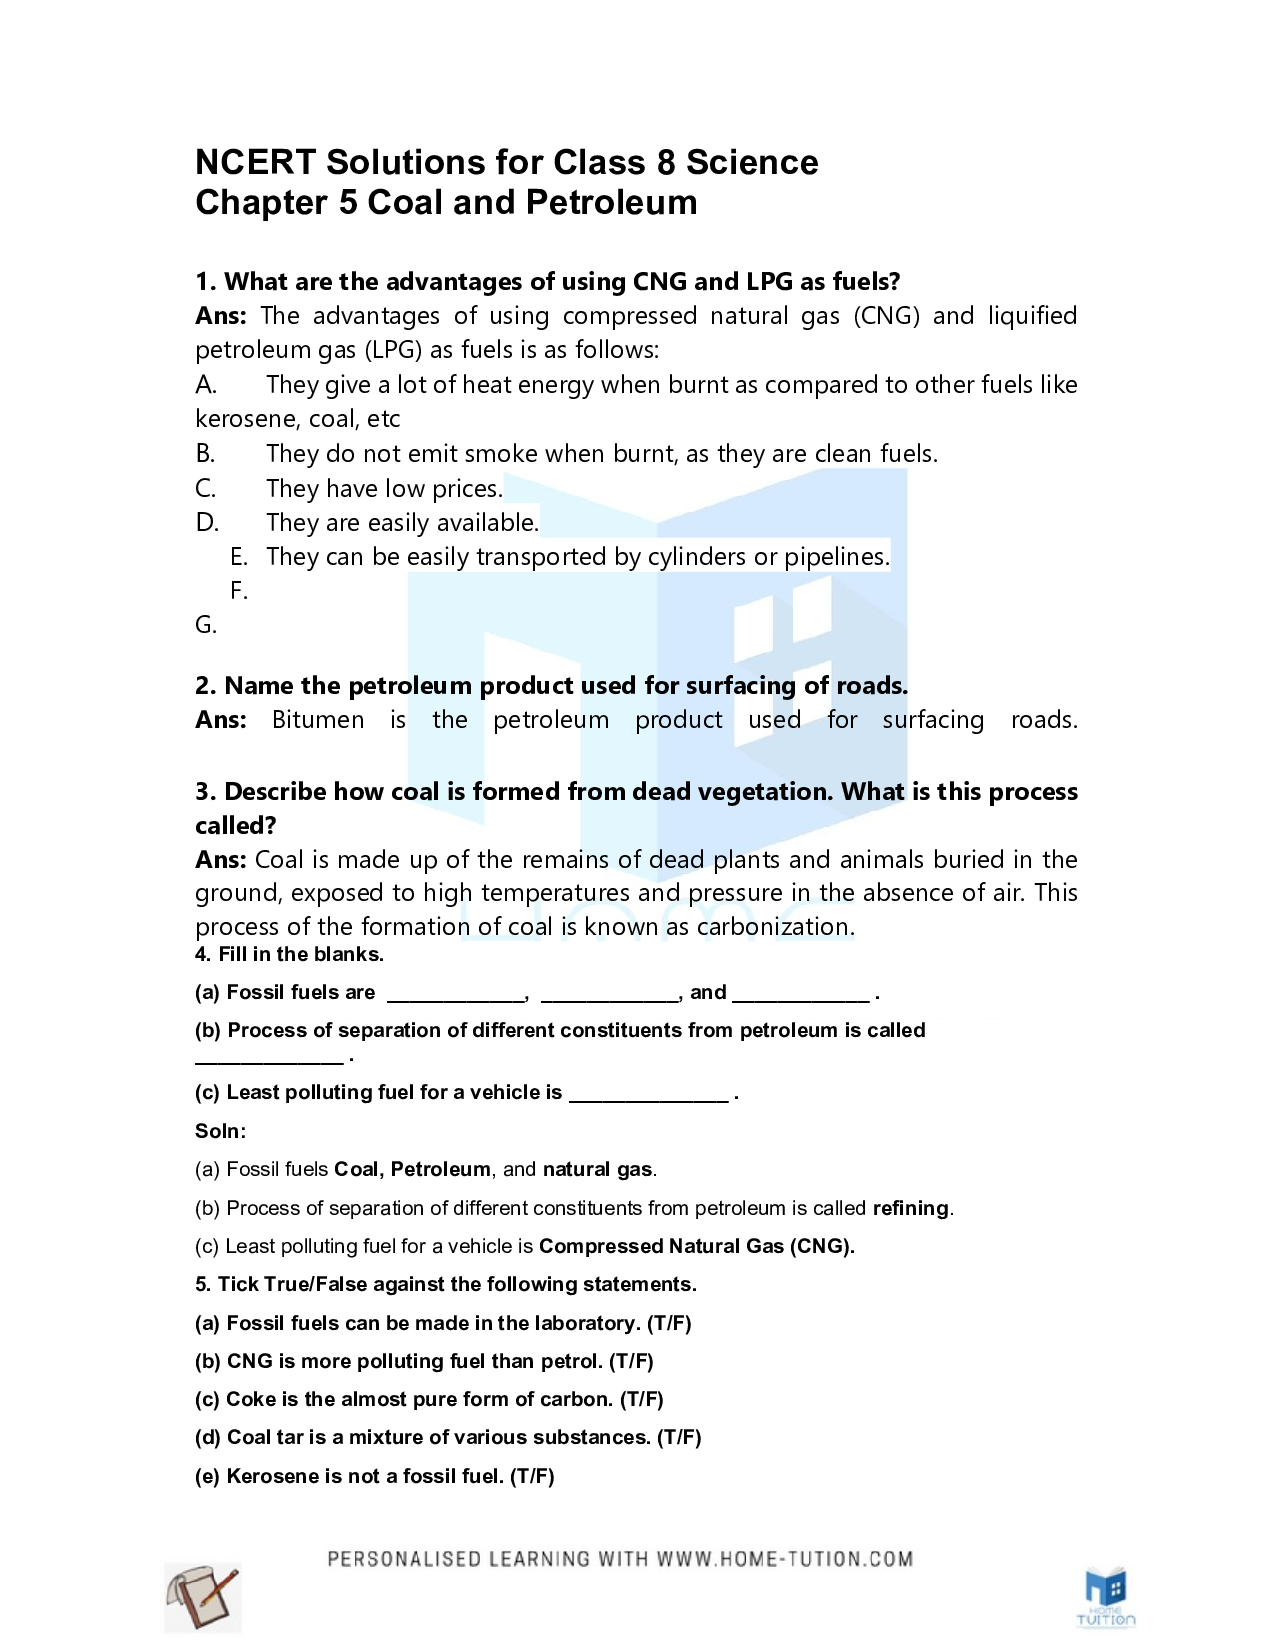 NCERT Solutions For Class 8 Science Chapter 5 Coal and Petroleum